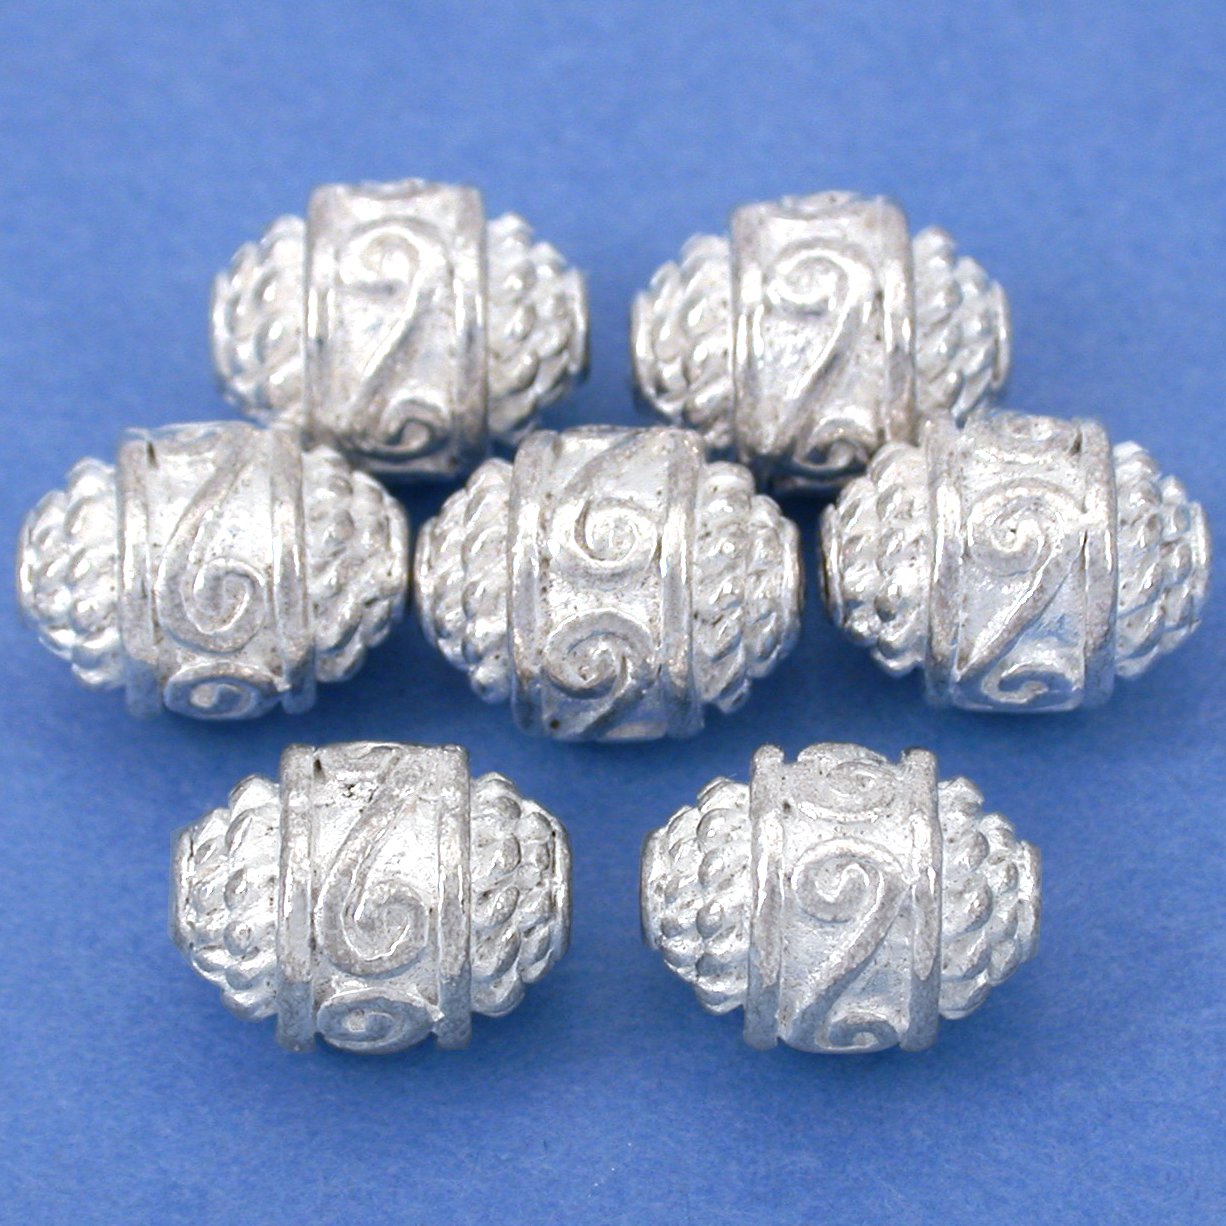 Bali Barrel Rope Silver Plated Beads 10.5mm 16 Grams 7Pcs Approx.